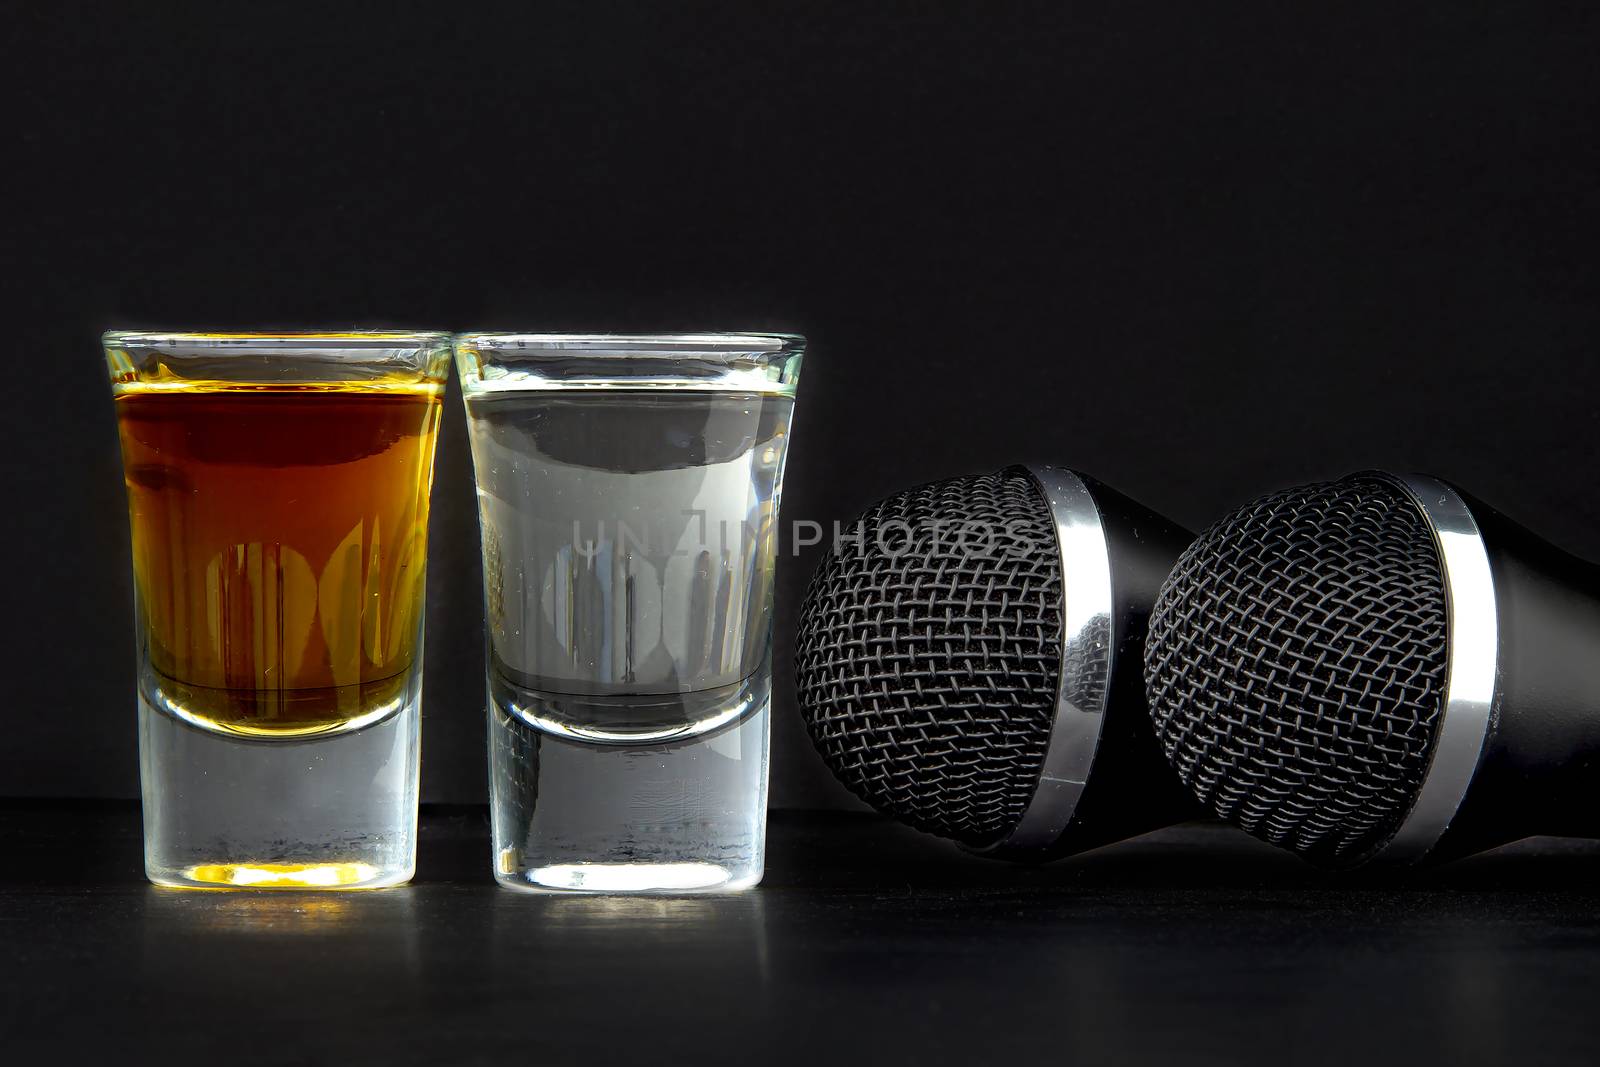 Shoot Glasses with liquor and two karaoke microphones on a black background by oasisamuel